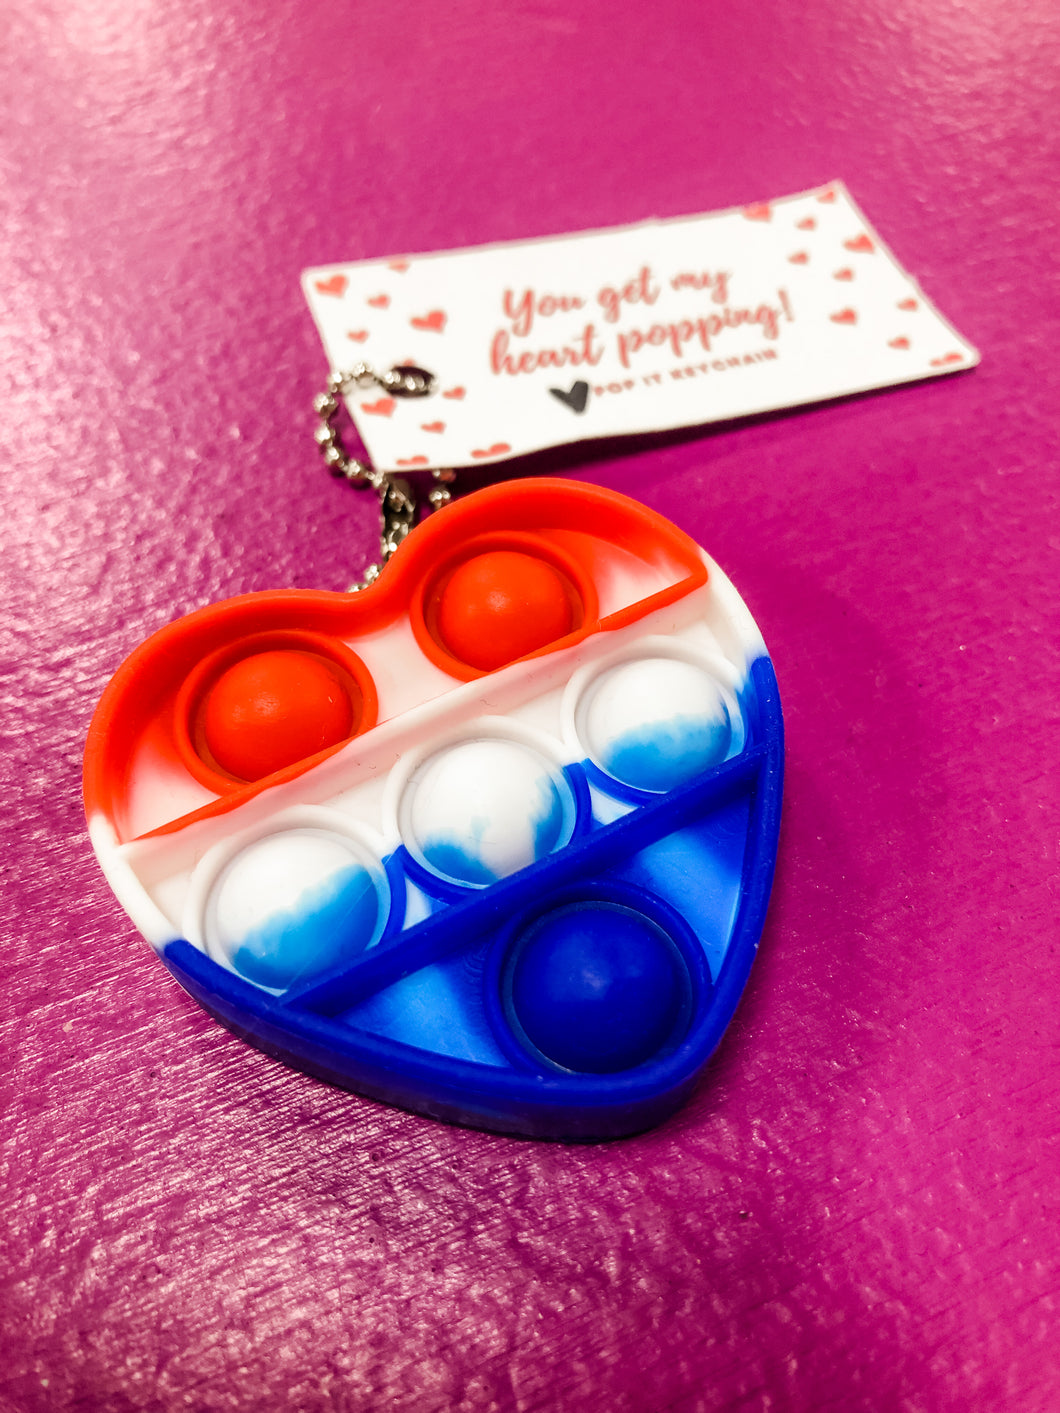 You Get My Heart POPPING! Pop it Keychain